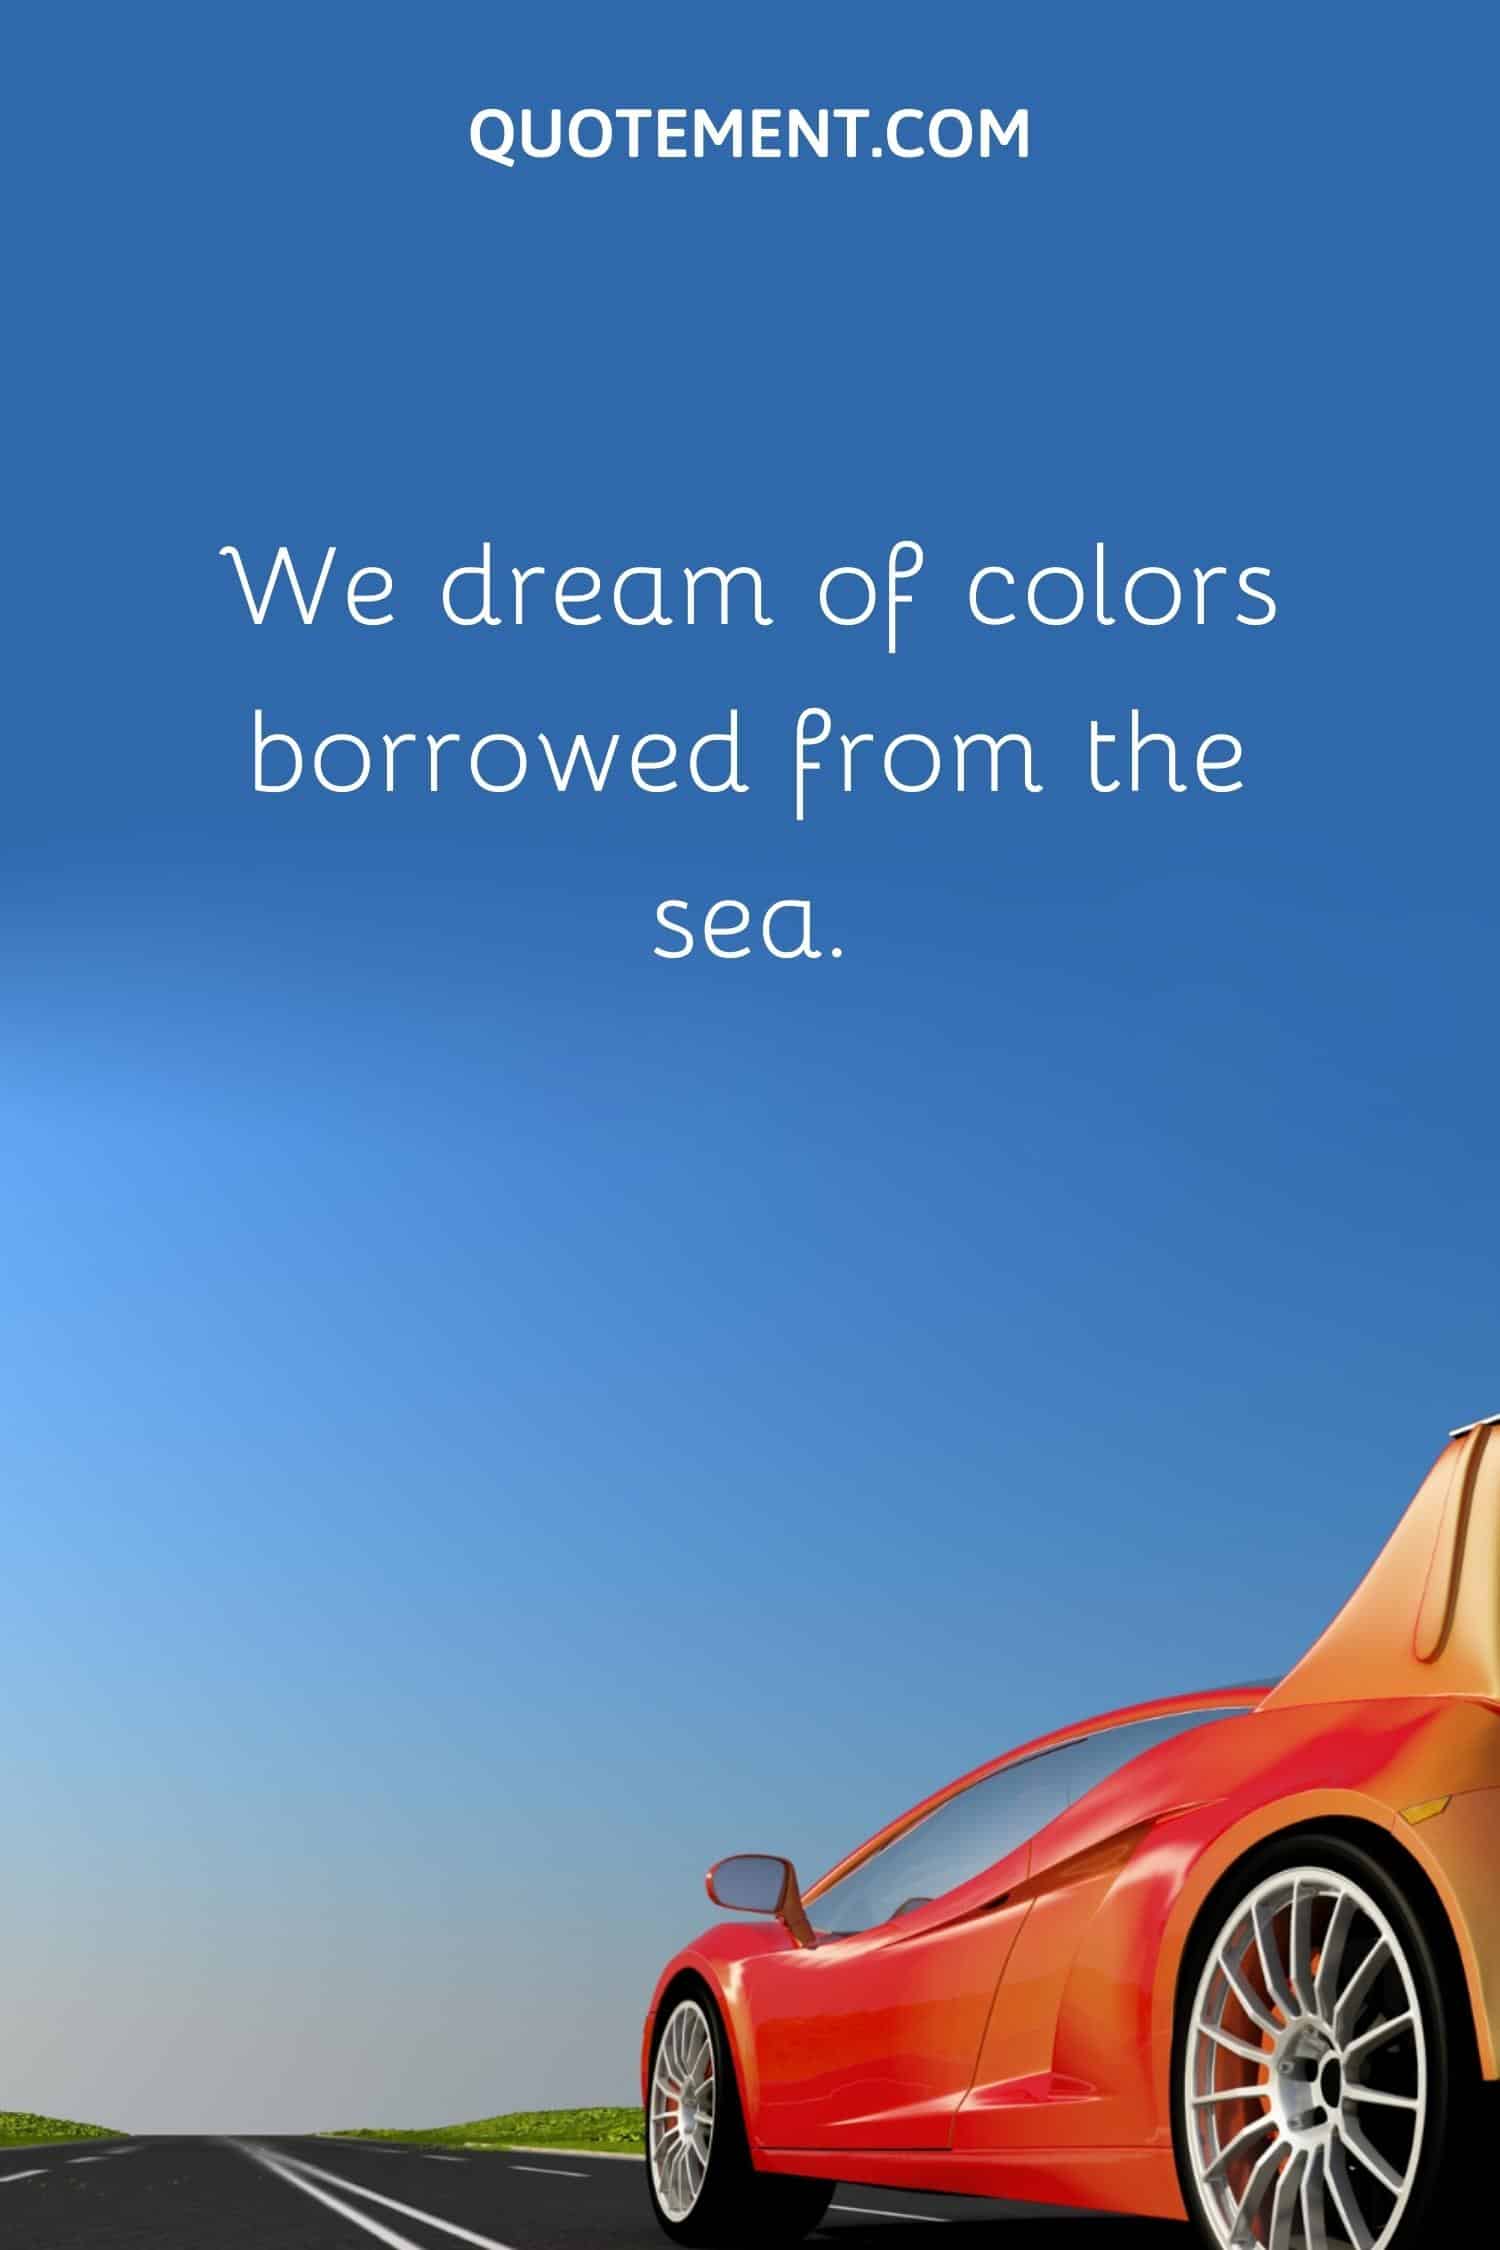 We dream of colors borrowed from the sea